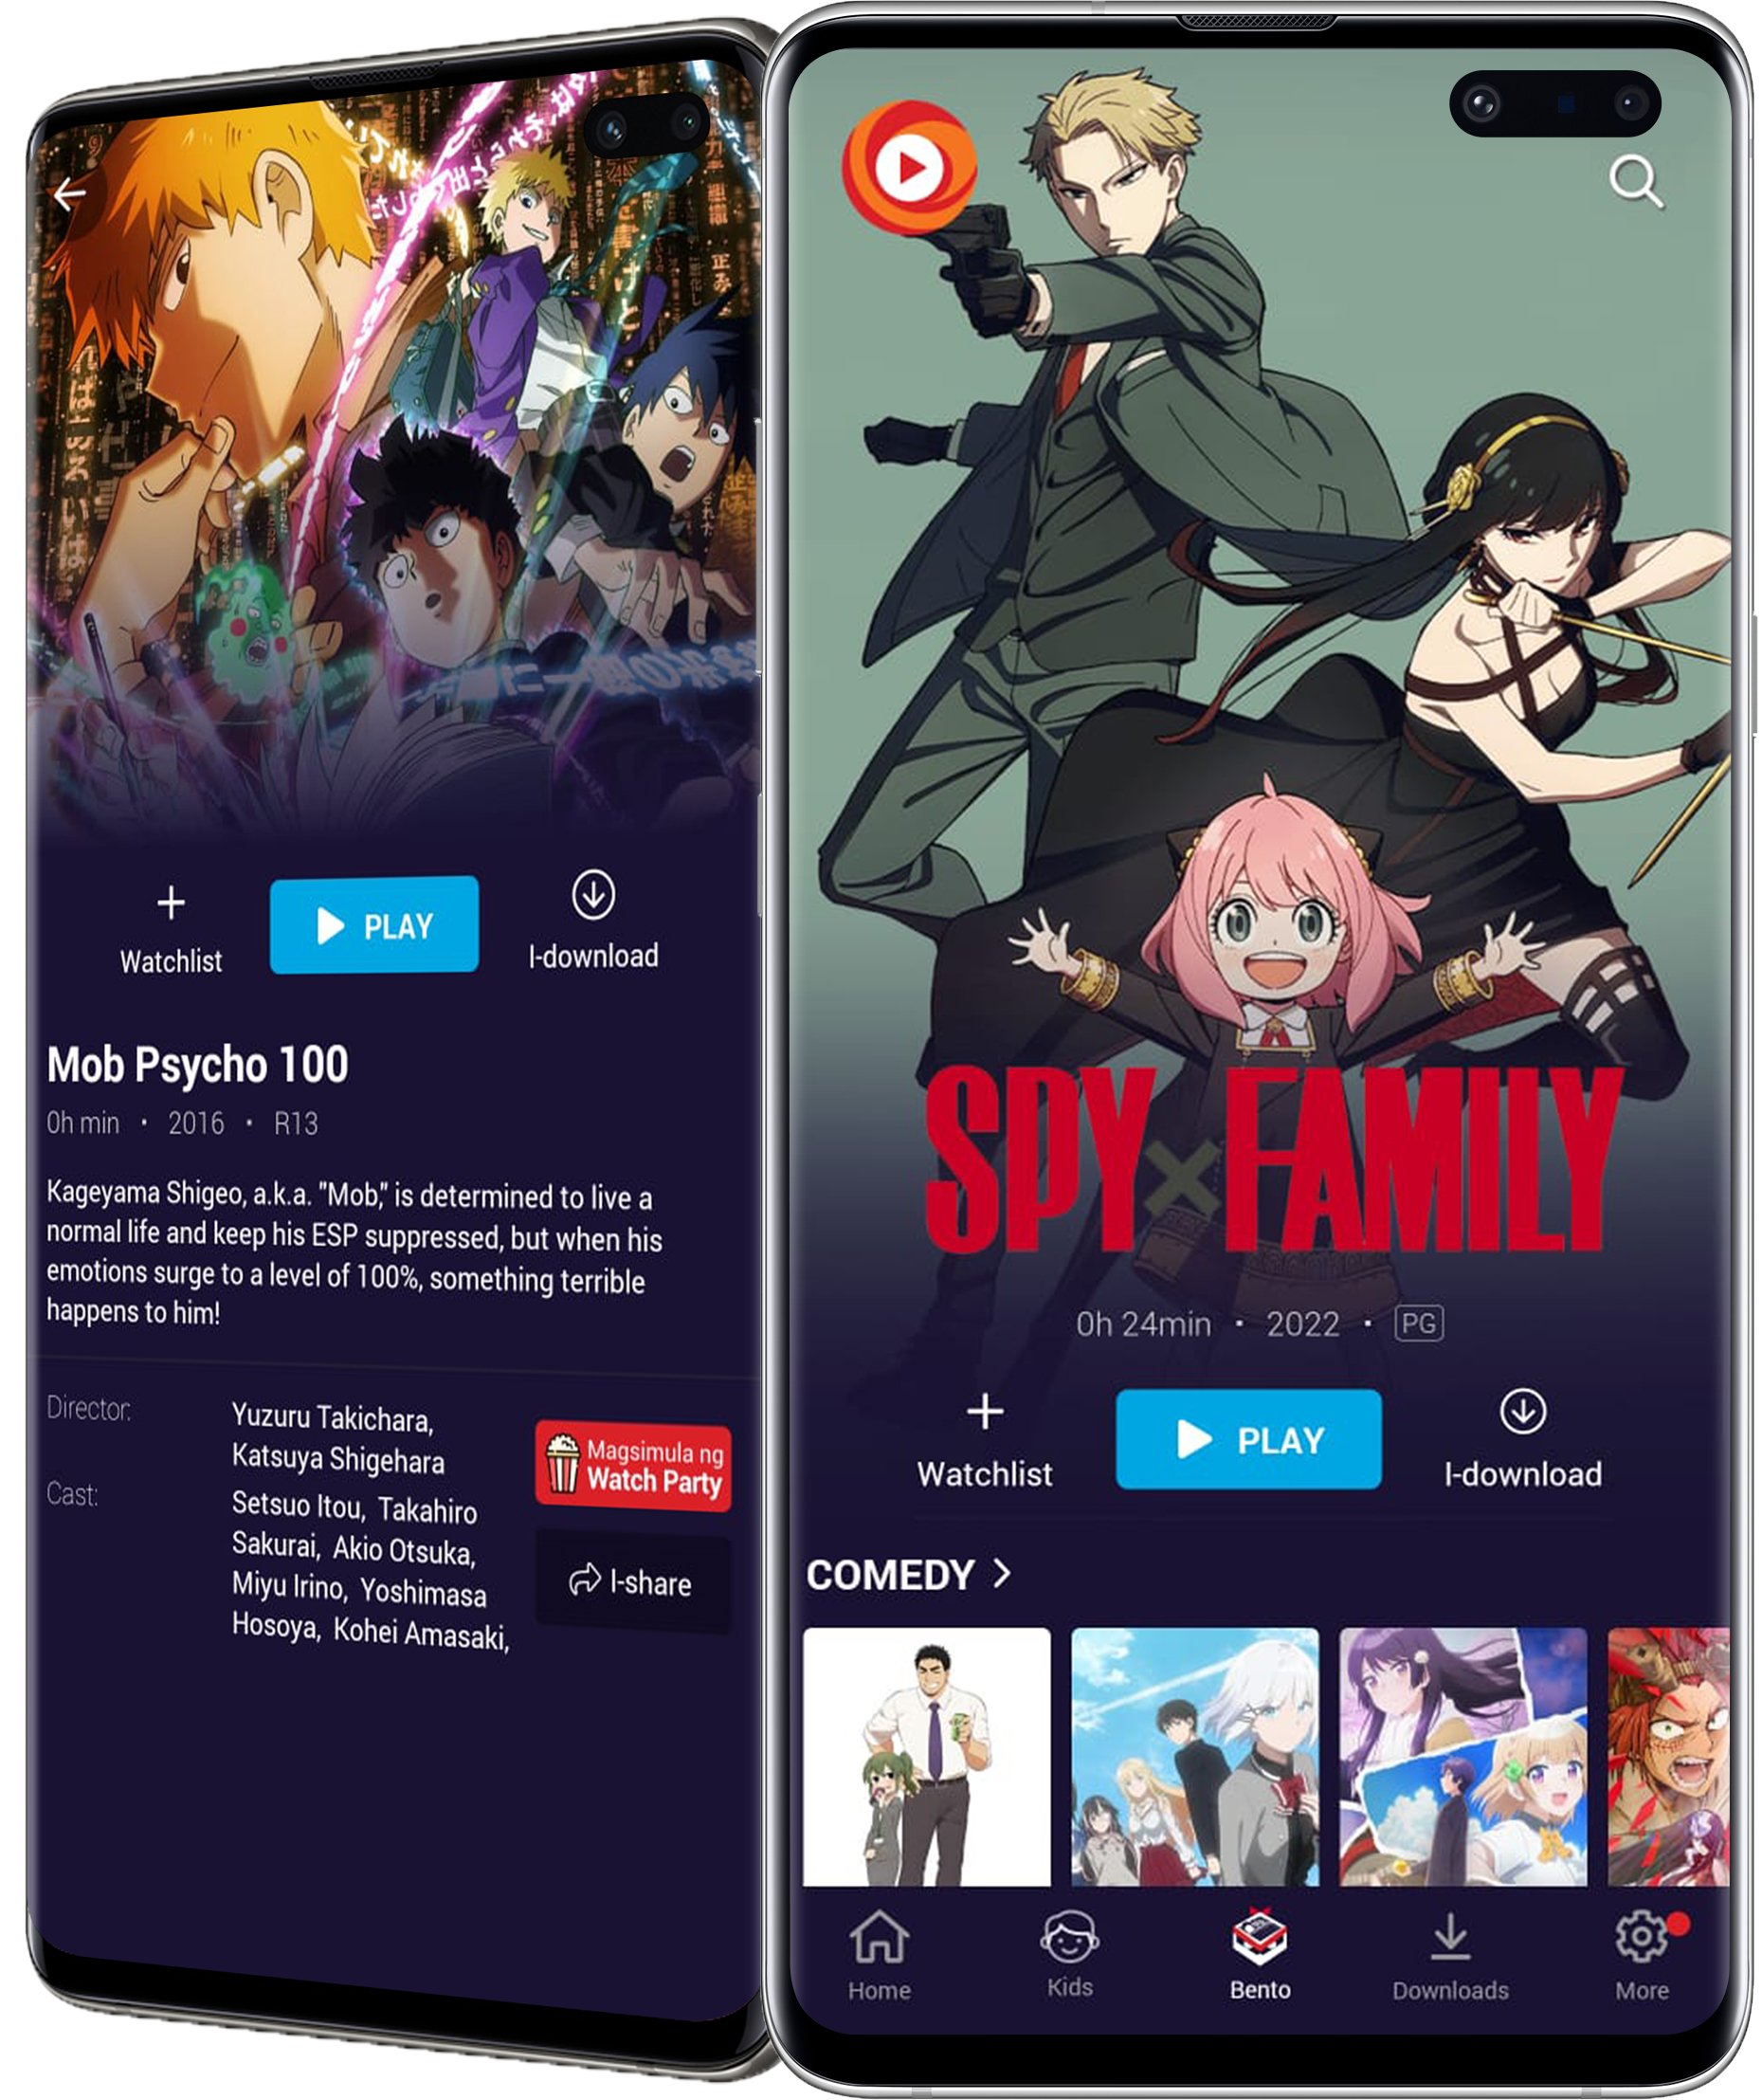 POPTV Launches Anime Channel BENTO